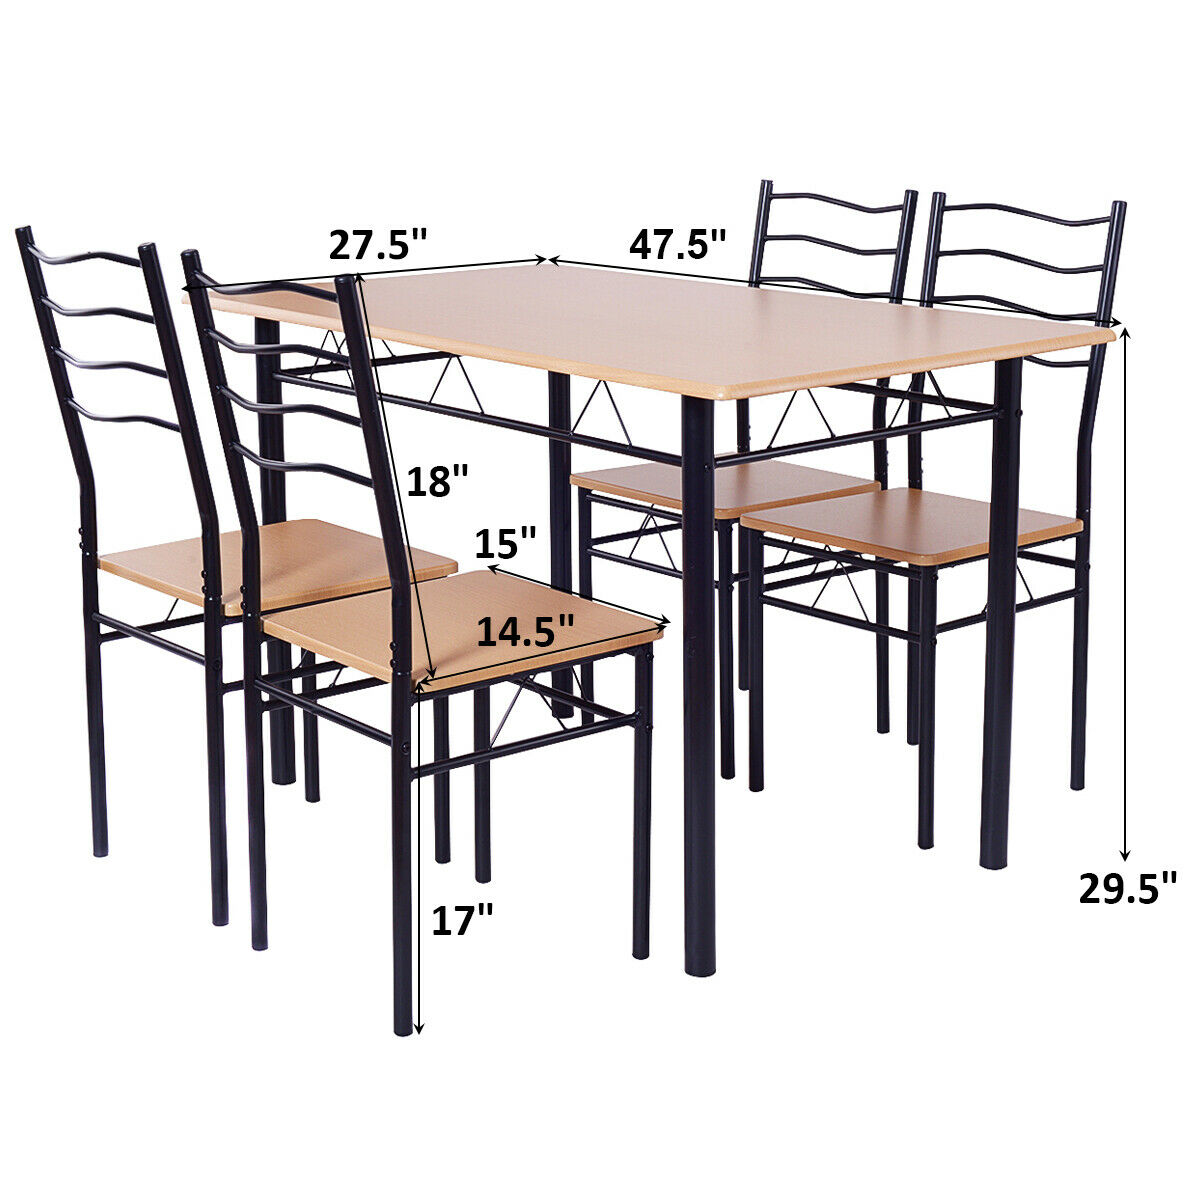 Costway 5 Piece Dining Table Set 29.5" with 4 Chairs Wood Metal Kitchen Breakfast Furniture Brown - image 2 of 8